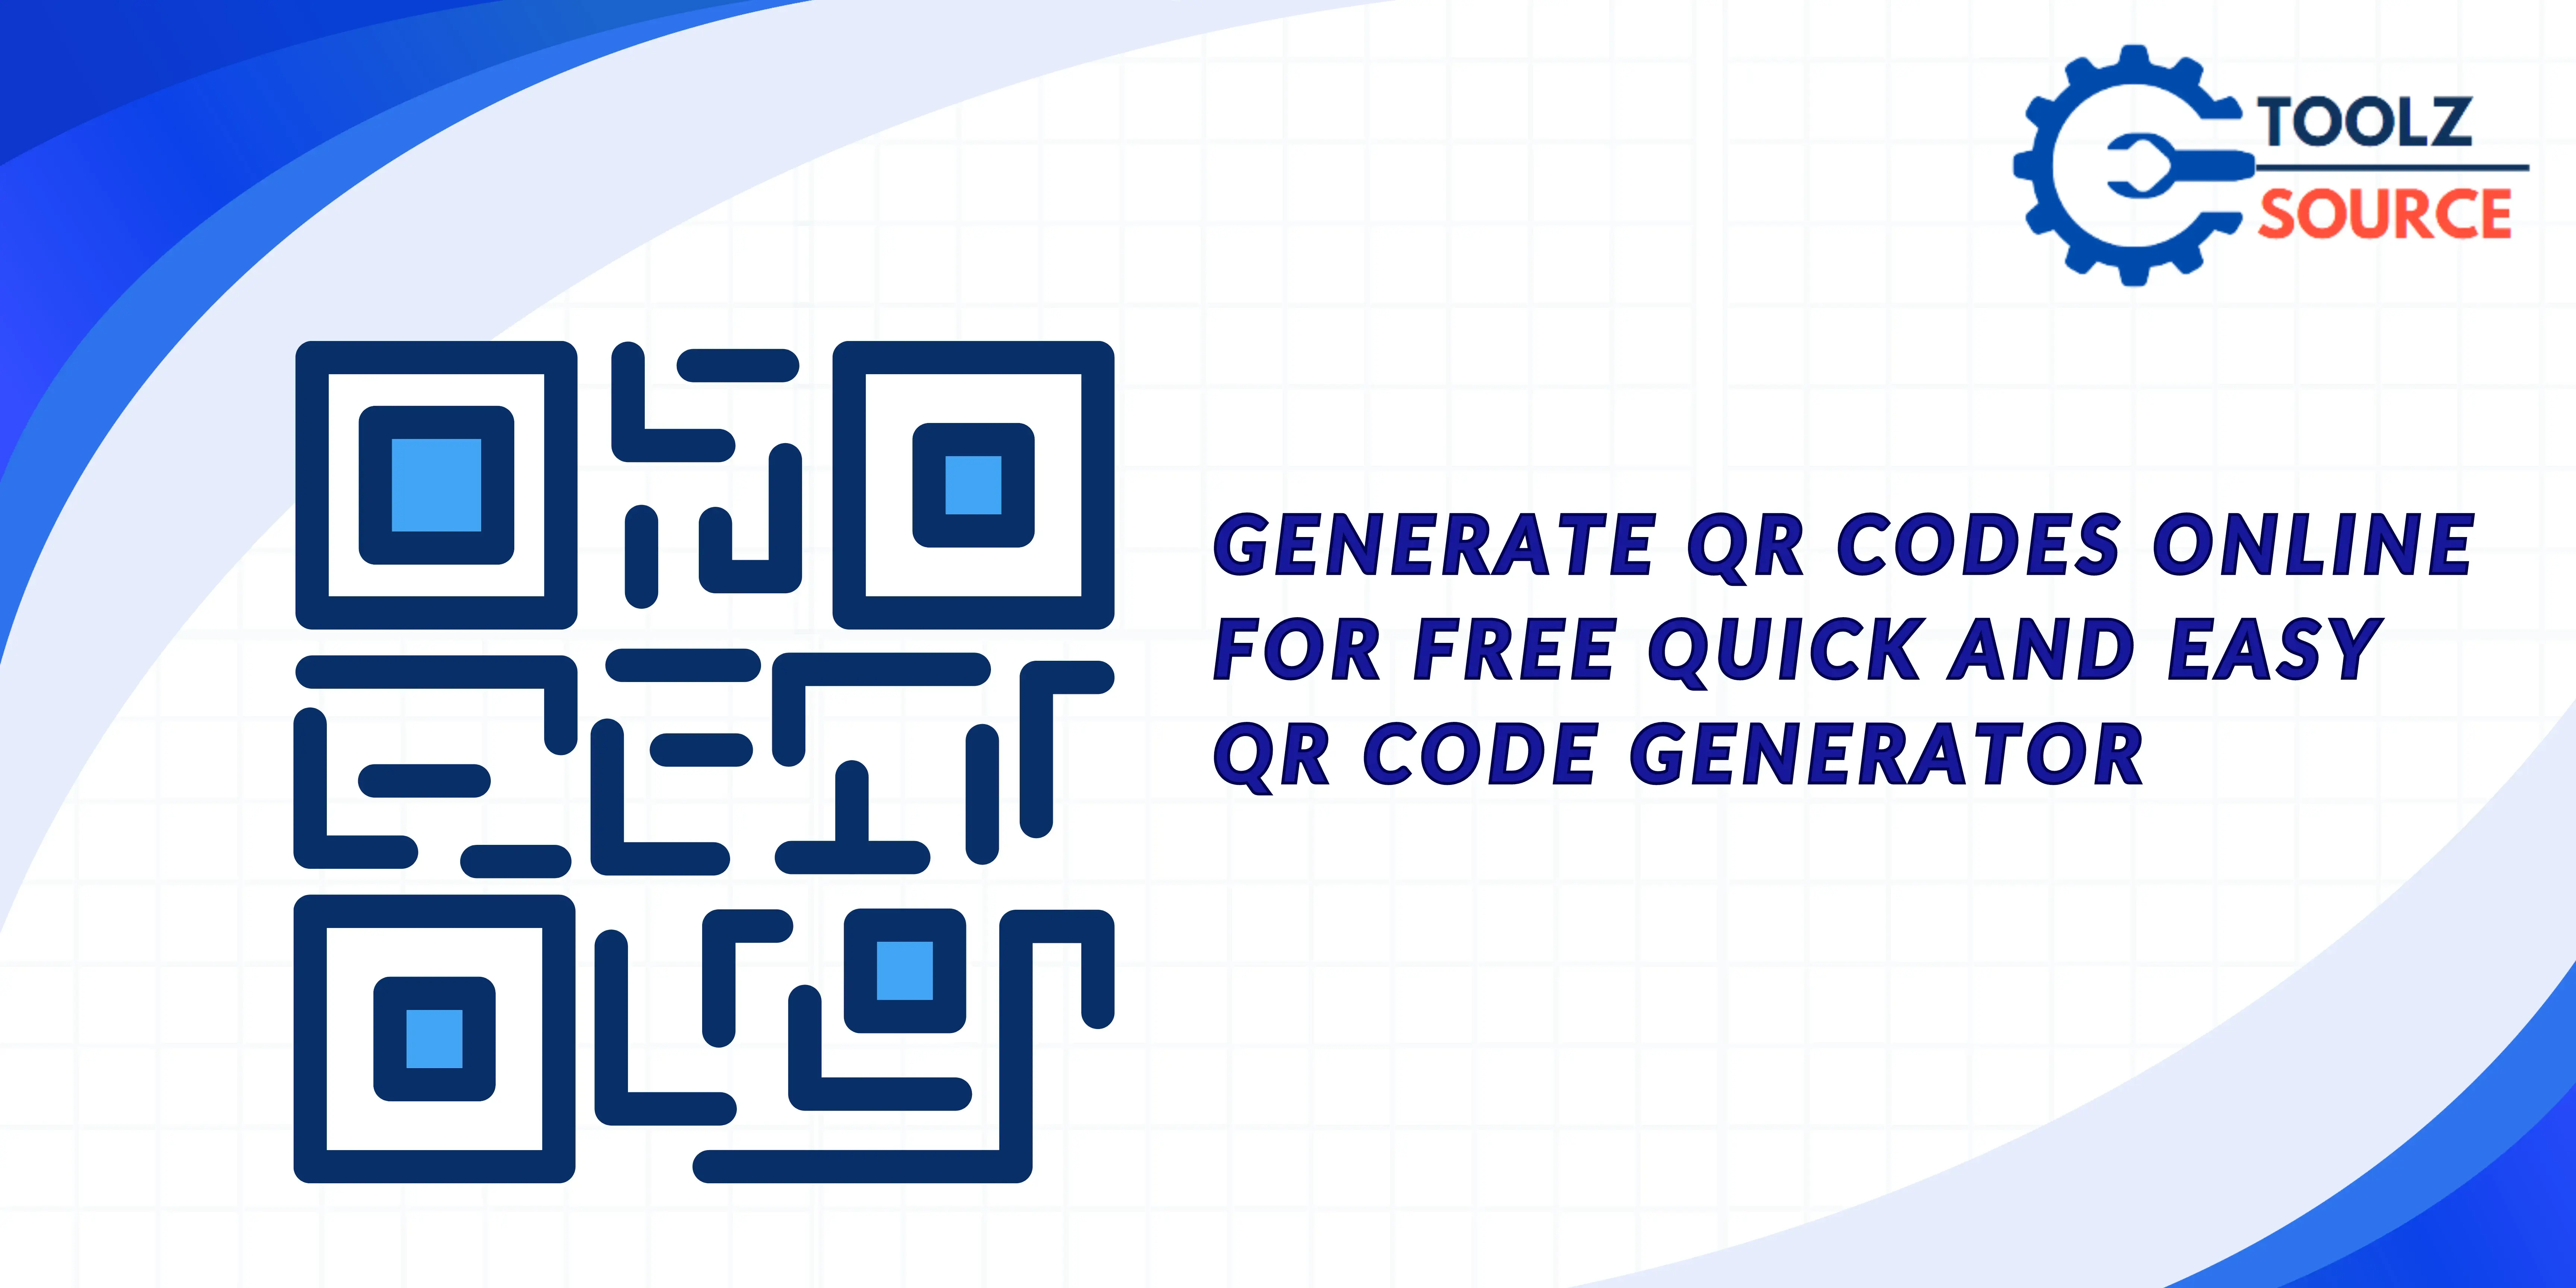 Generate QR Codes Online for Free: Quick and Easy QR Code Generator